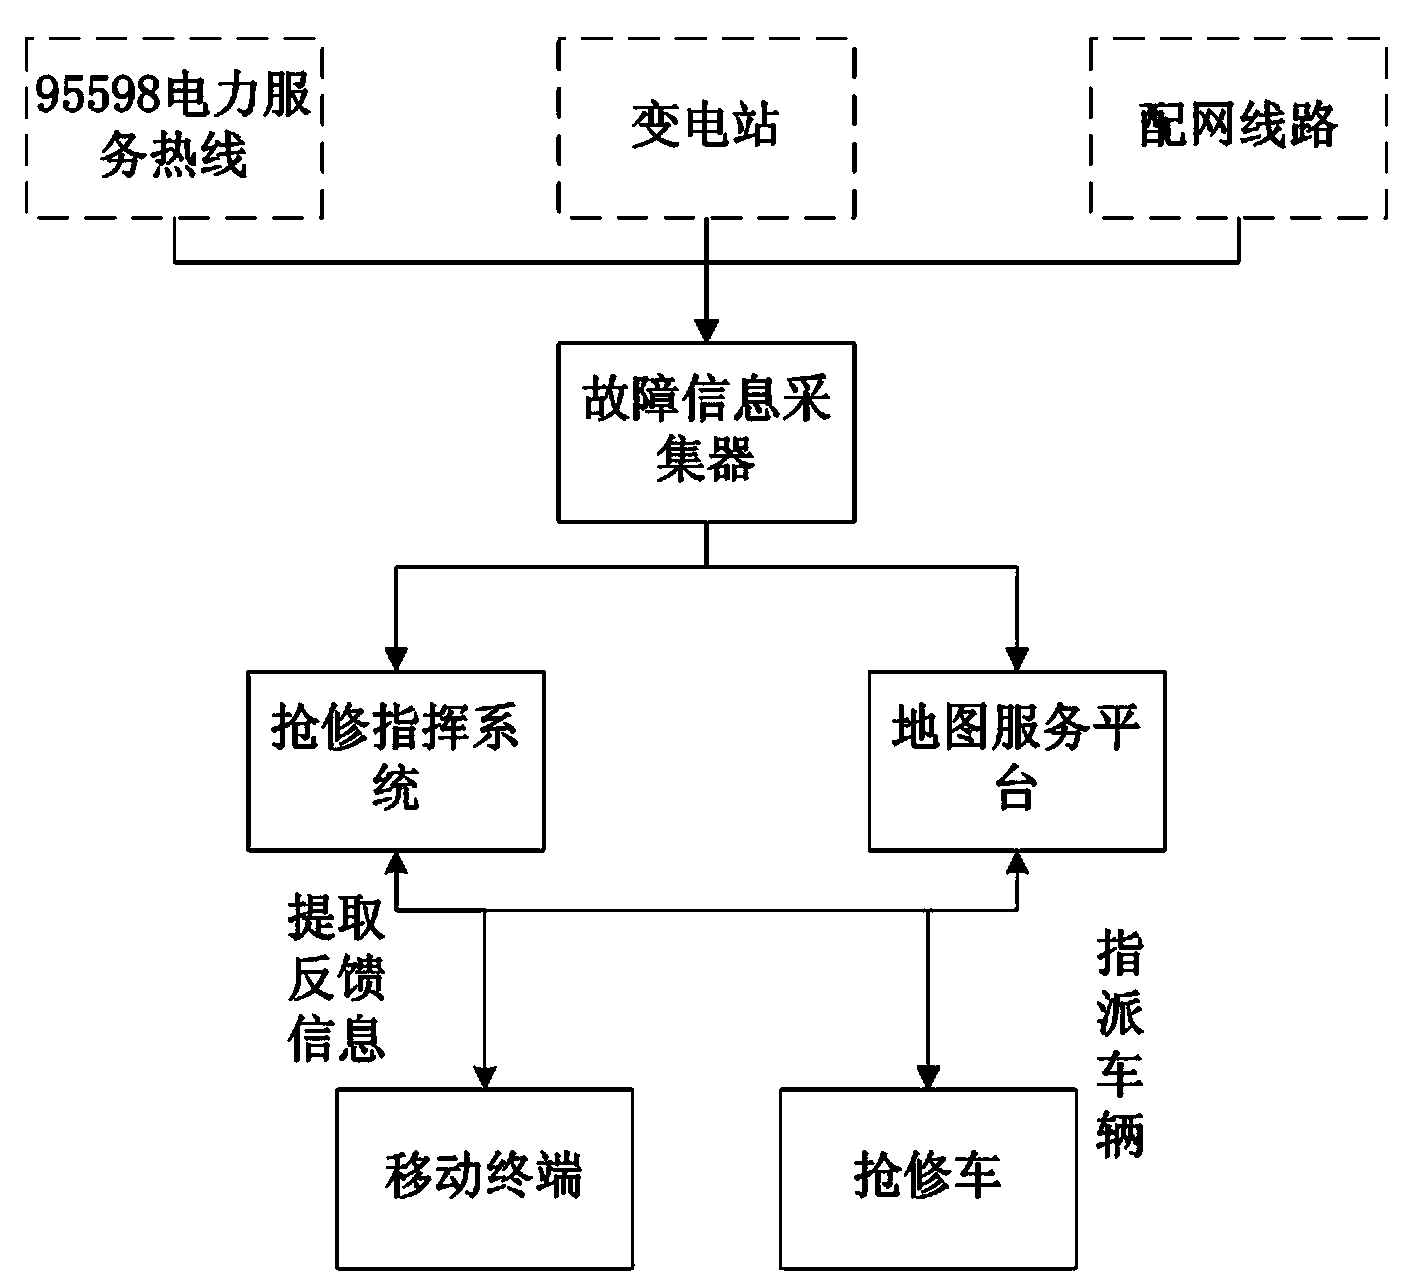 Power line repair commanding method based on CIS and movable operation